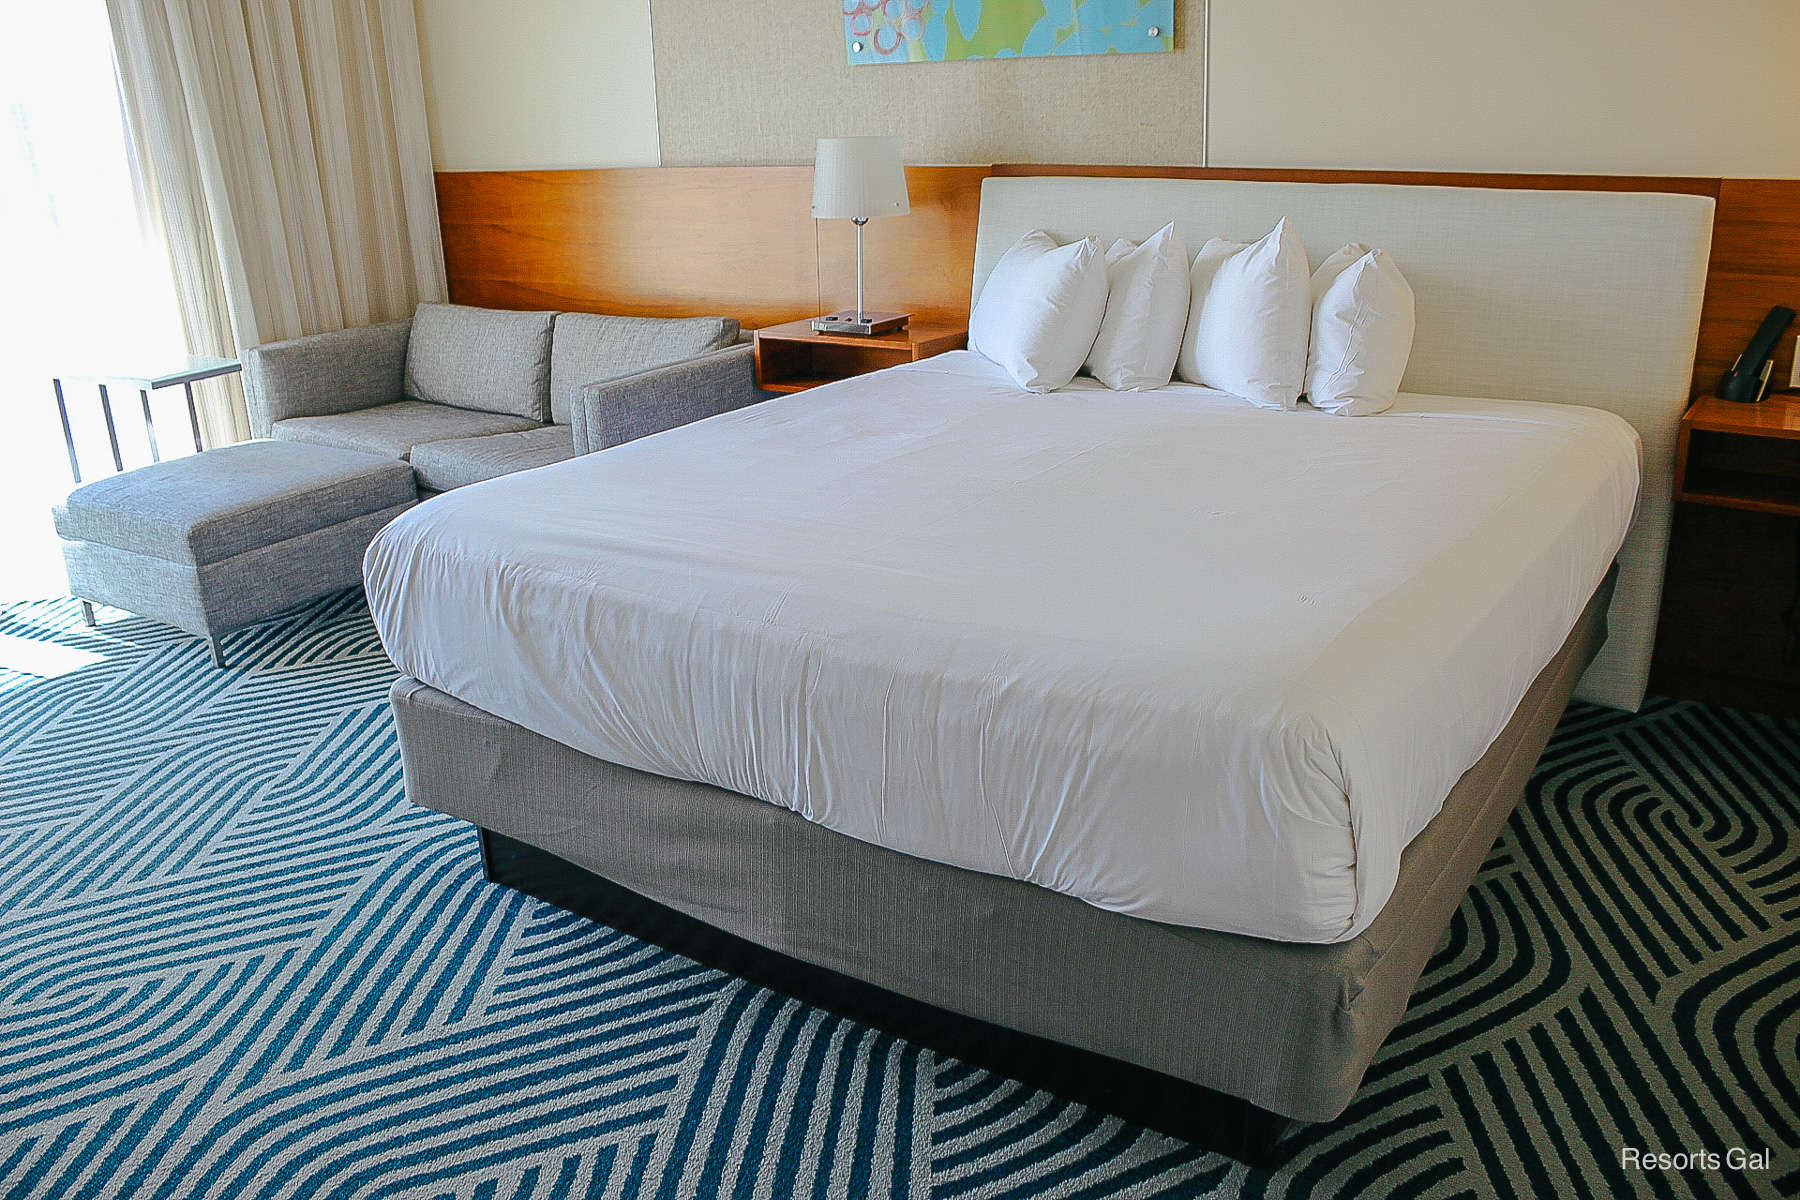 room interior with king-size bed Hyatt Regency Grand Cypress Review 